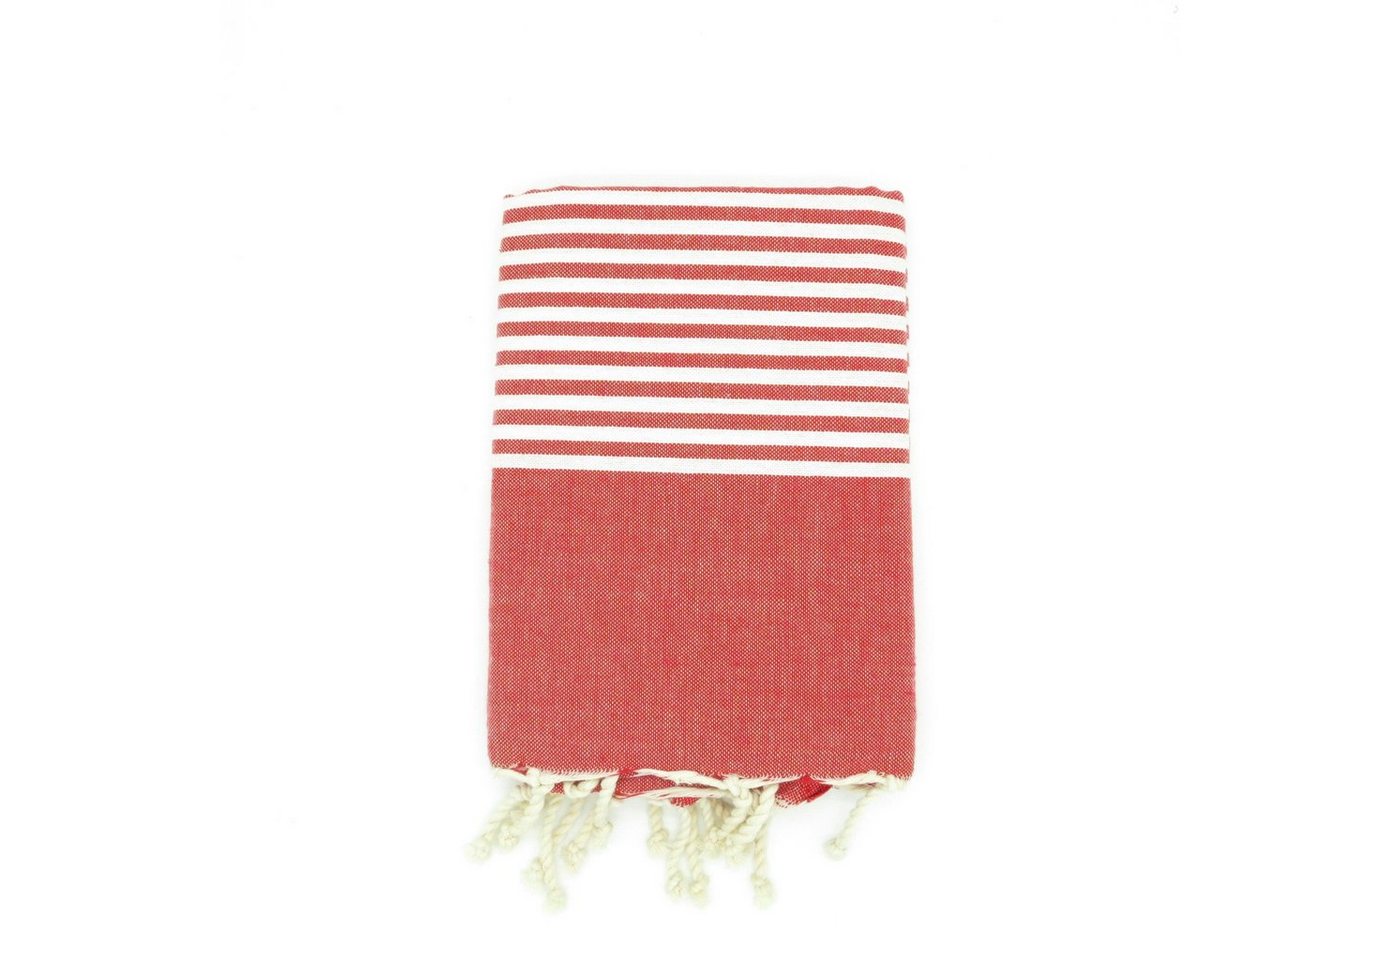 Cotonway Hamamtuch Fouta Fala, 100% recycling Baumwolle von Cotonway